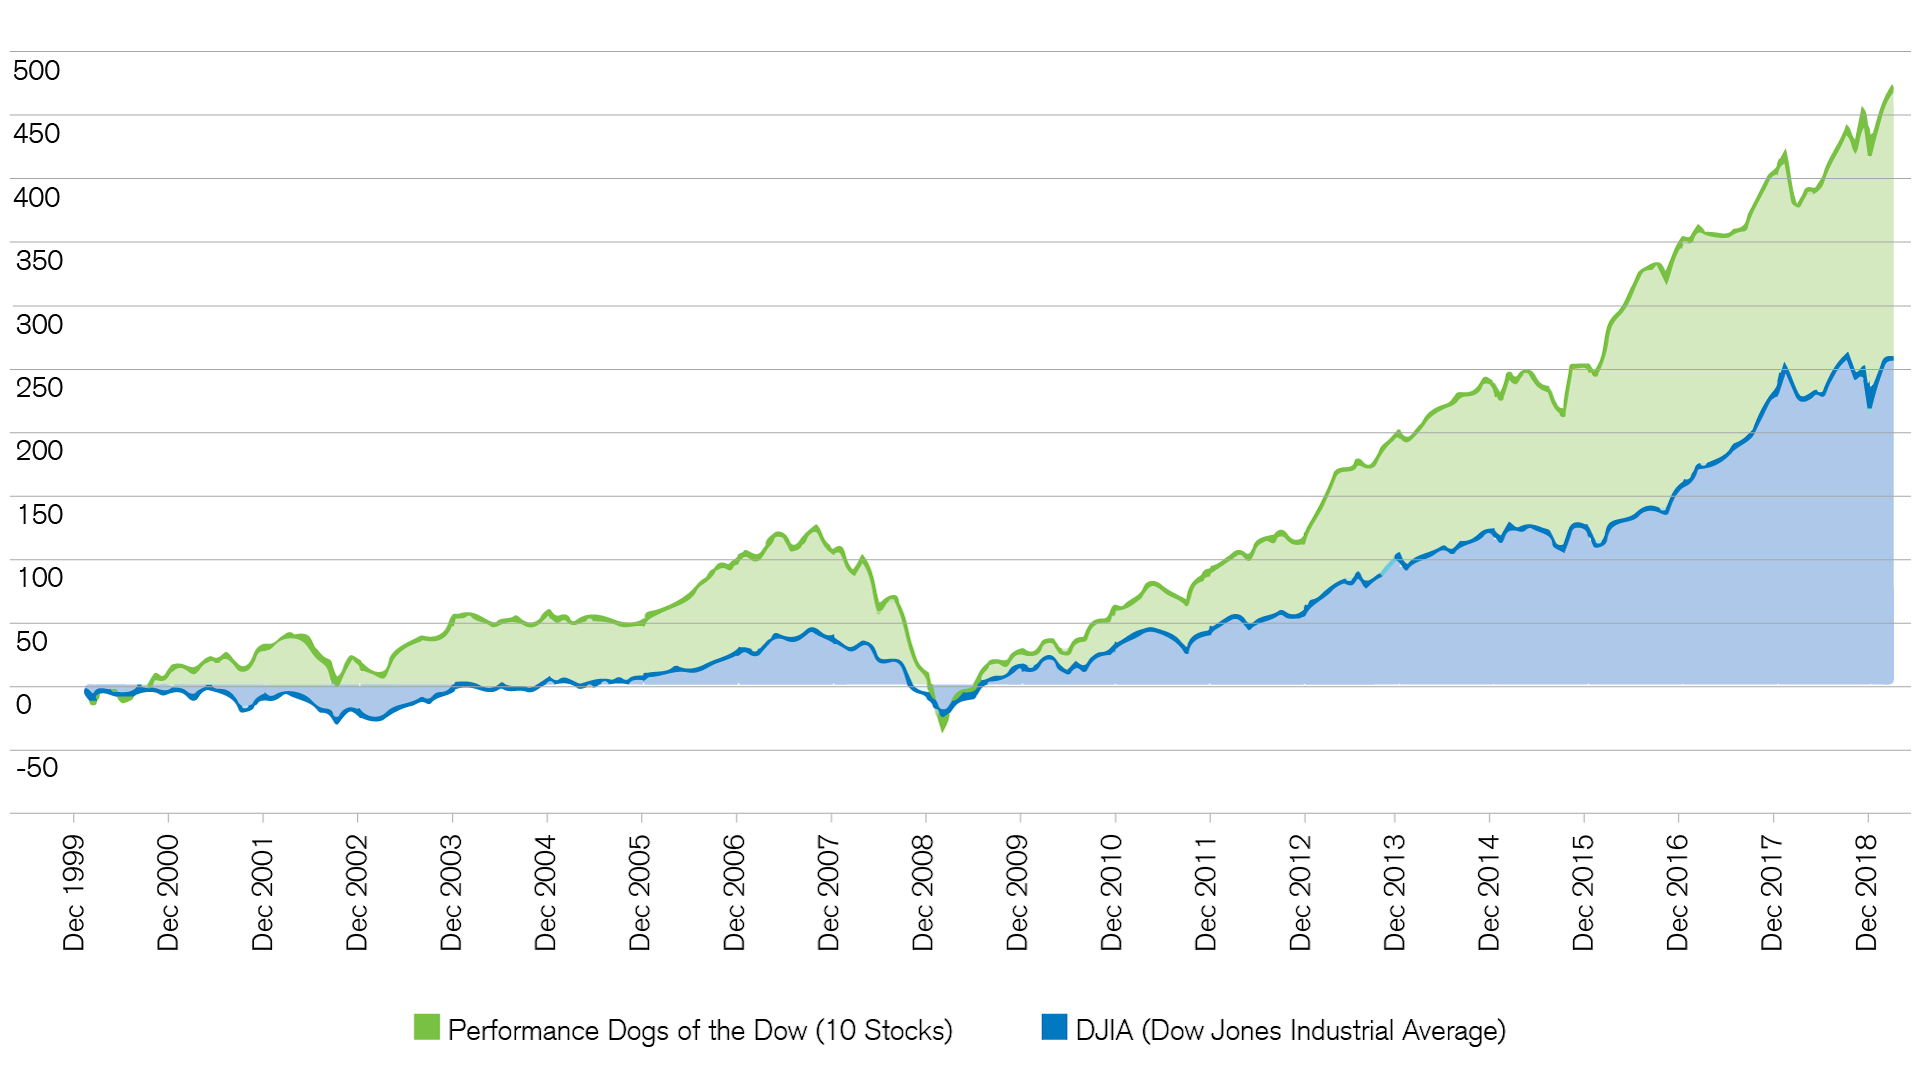 dividend-strategy-shows-mostly-positive-balance-sheet 